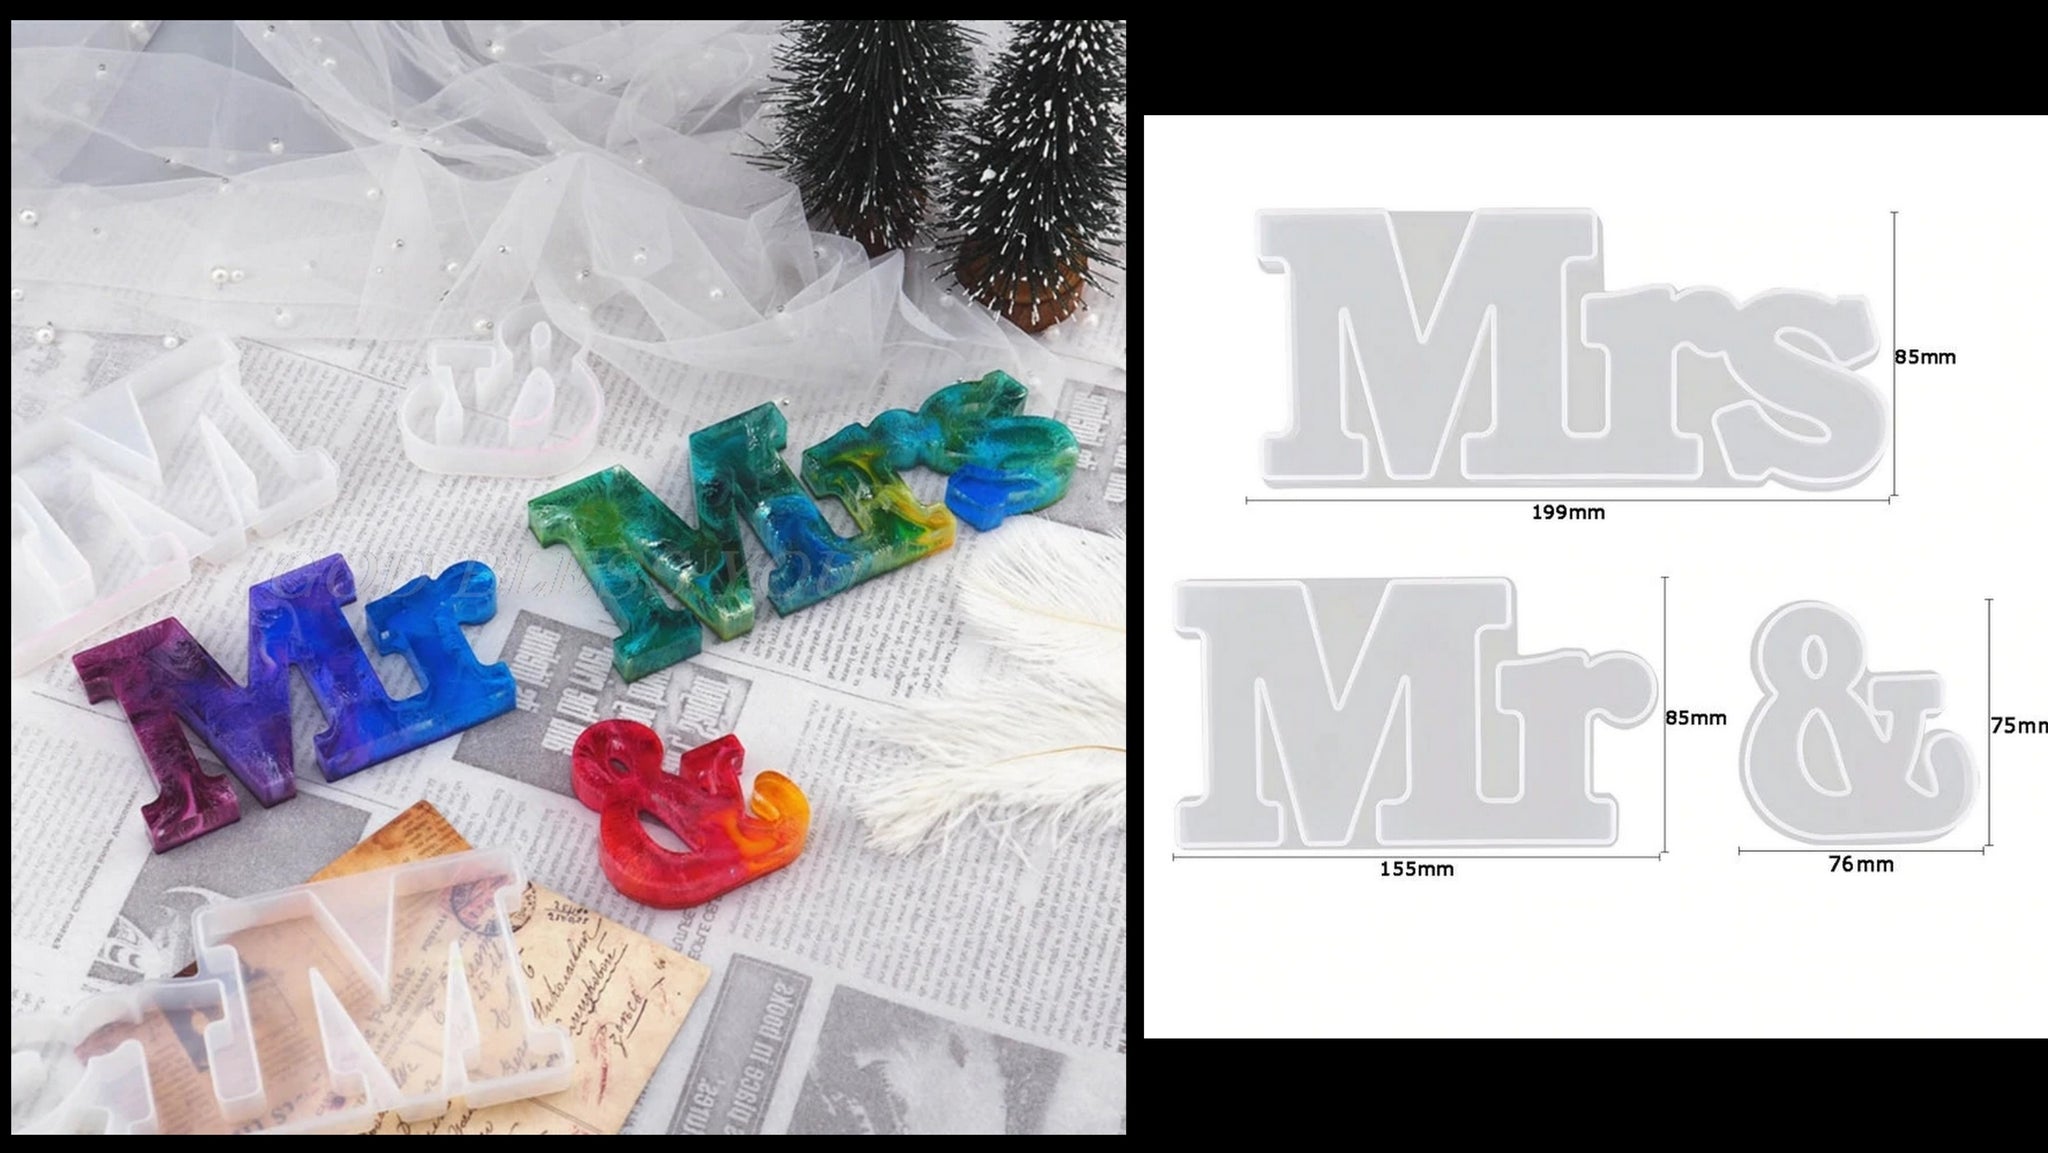 MR & MRS Word Letter Mold Mould for Baking,Cake,Chocolate,Clay and Resin crafts